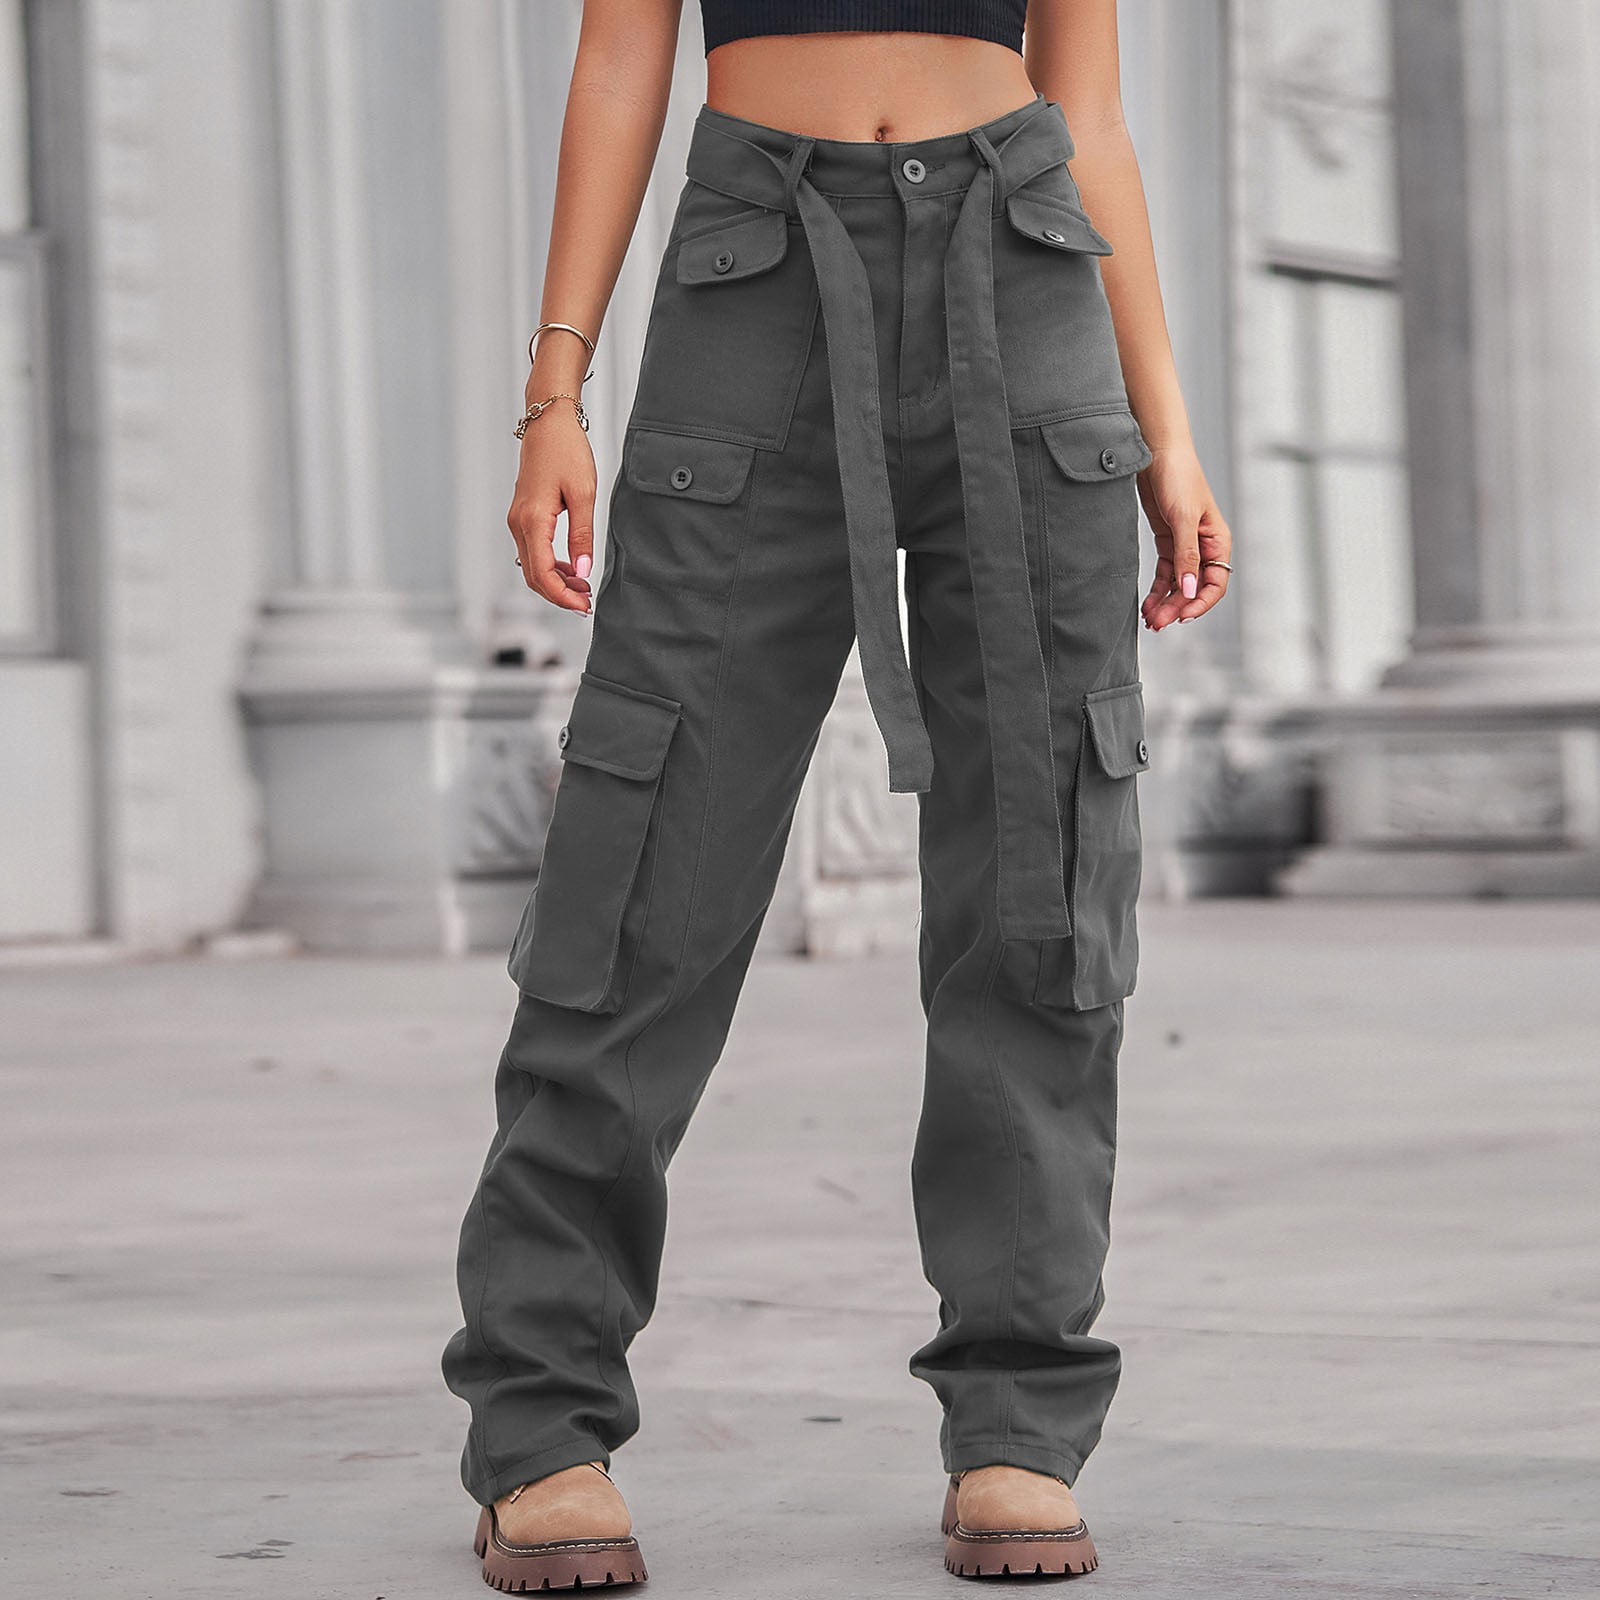 How To Wear The Cargo Pant This Fall - Ciin Magazine